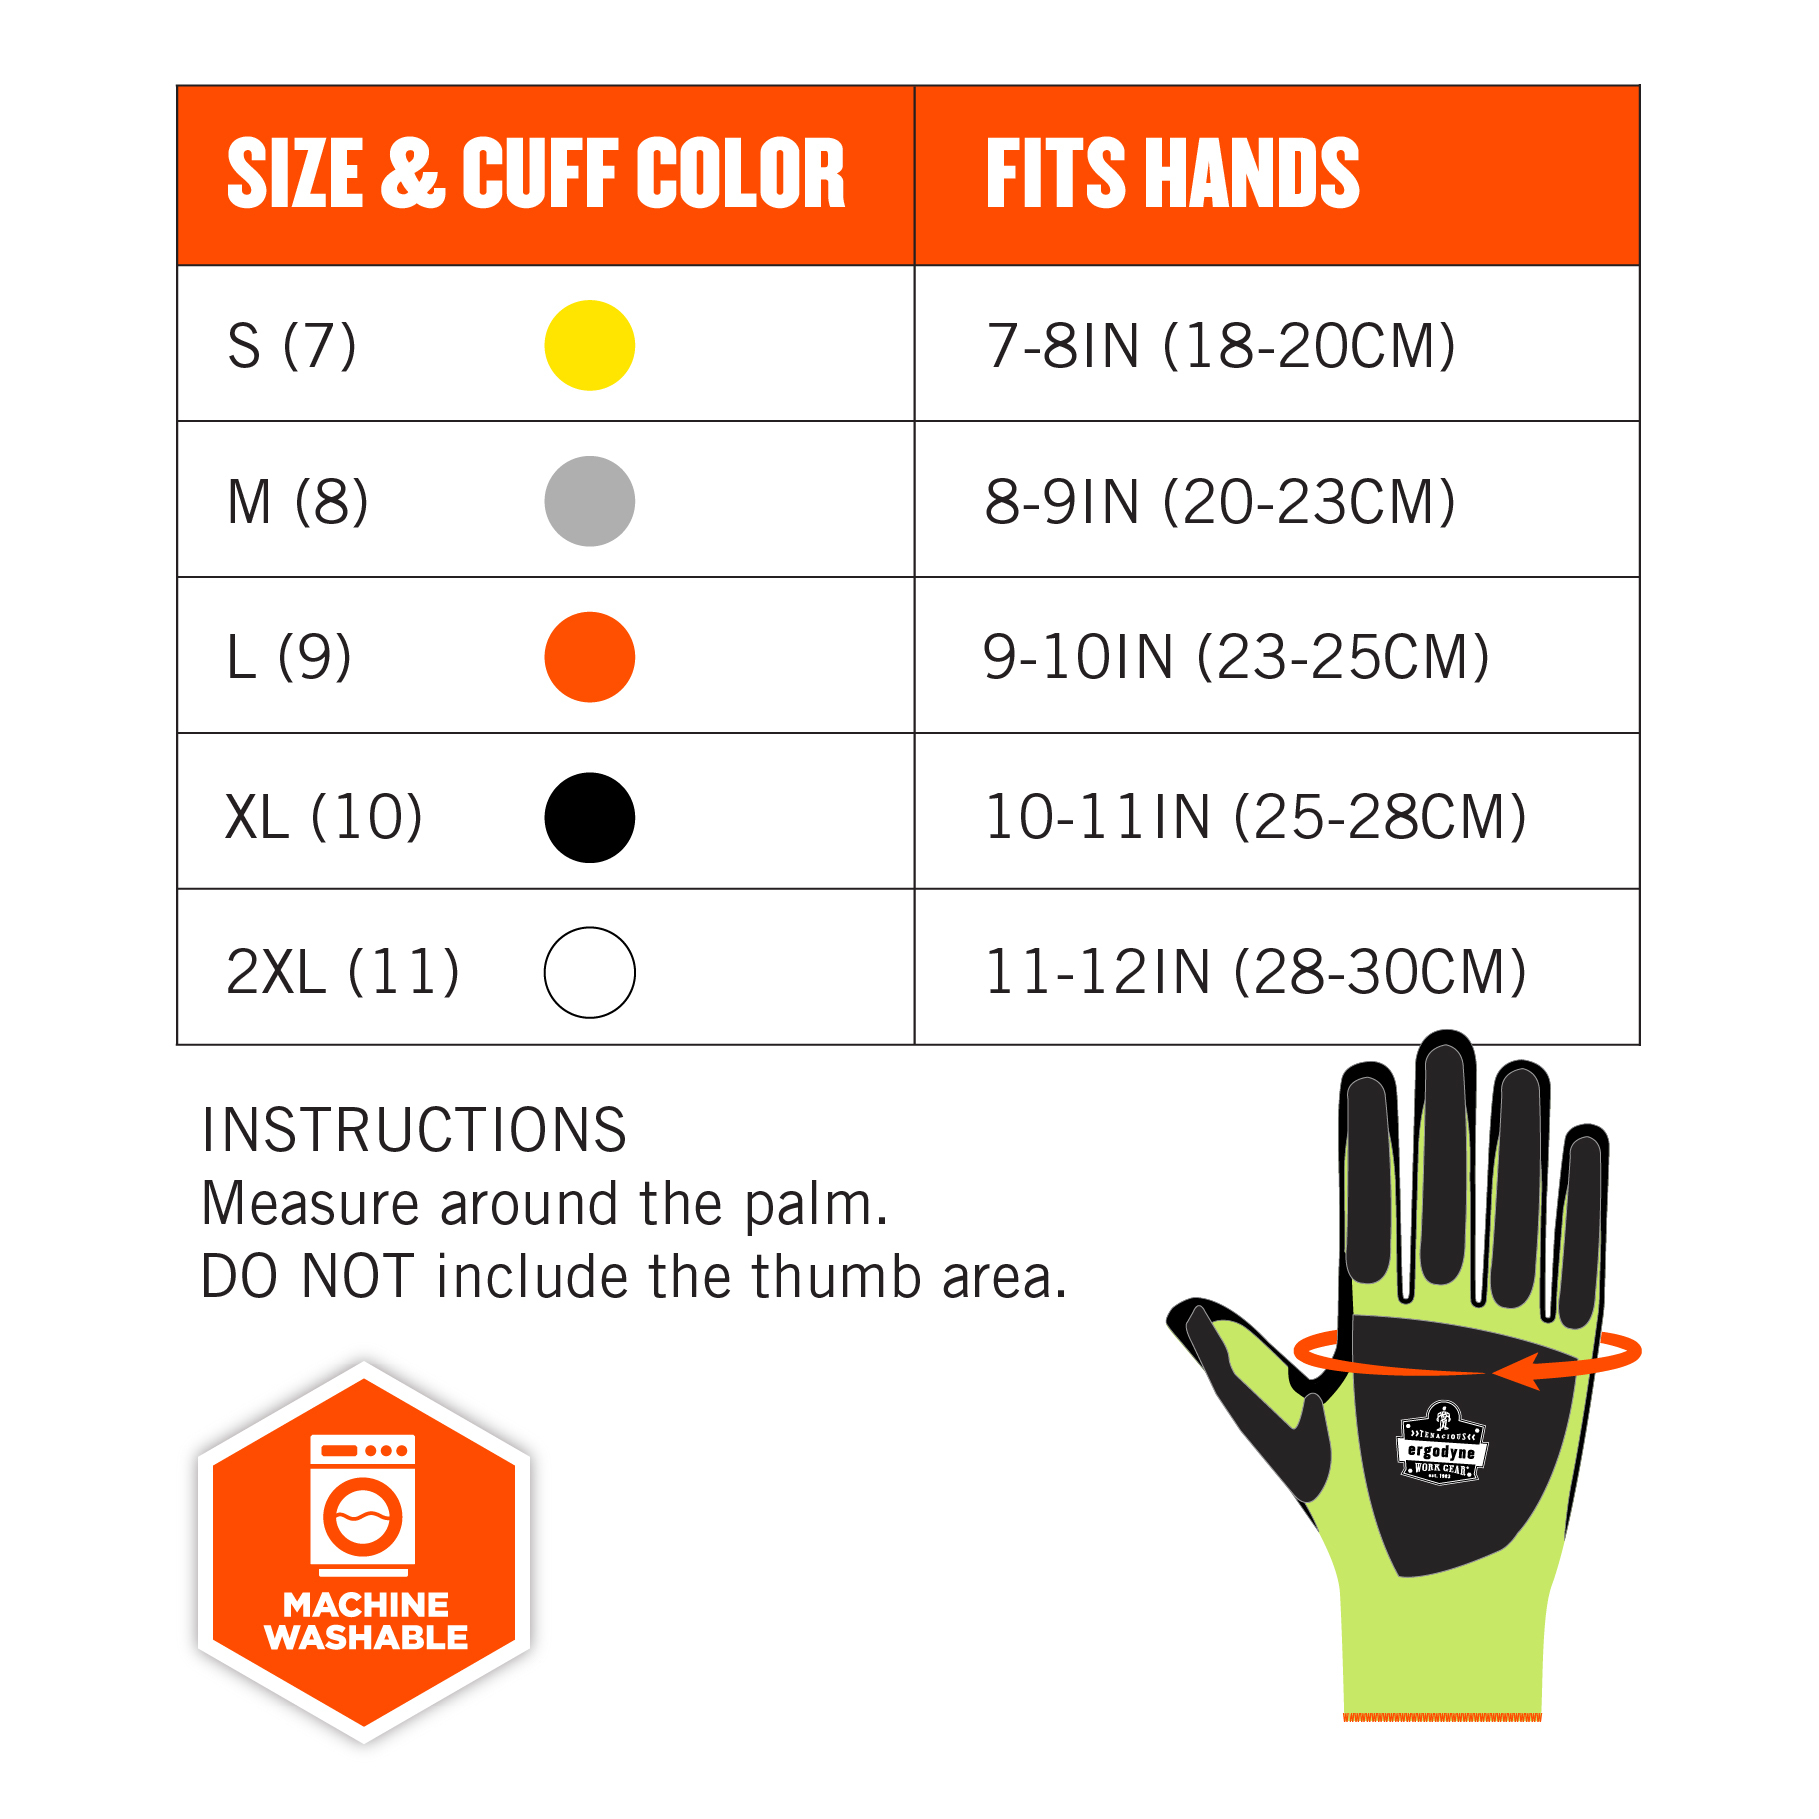 HAND PROTECTION MUST BE WORN SIGN 30CM X 25CM